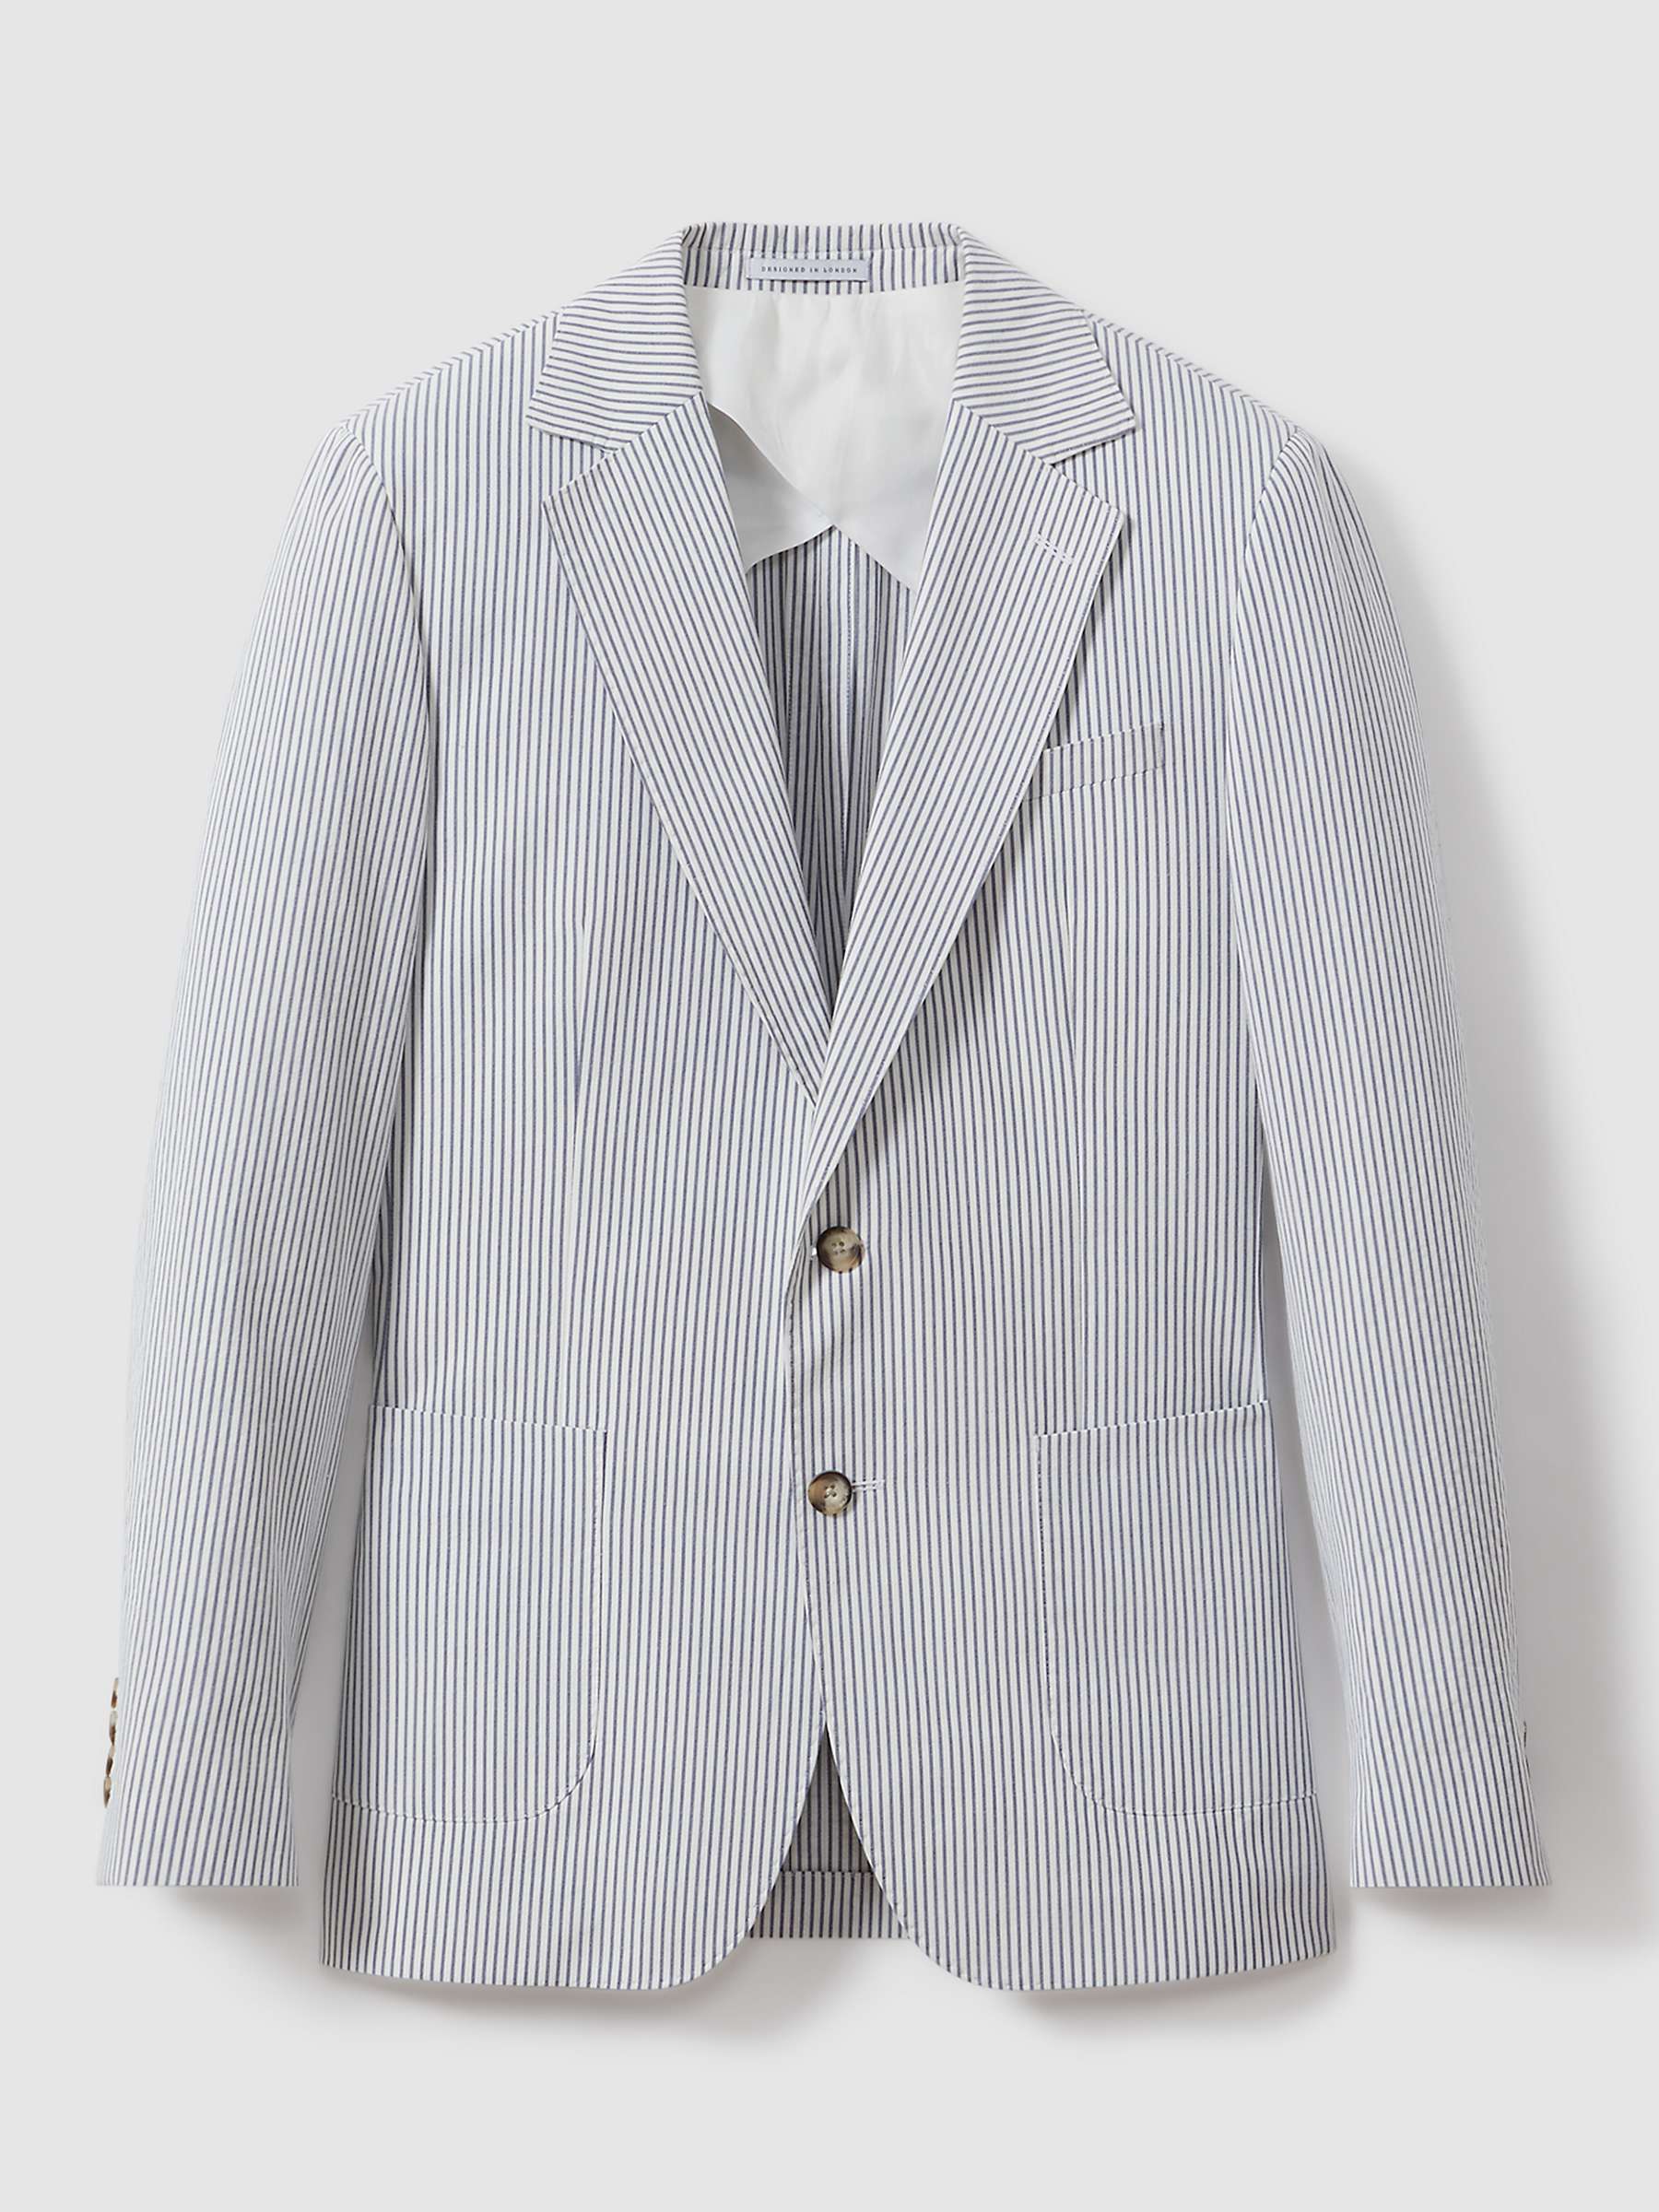 Buy Reiss Barr Tailored Fit Stripe Suit Jacket, Soft Blue/White Online at johnlewis.com